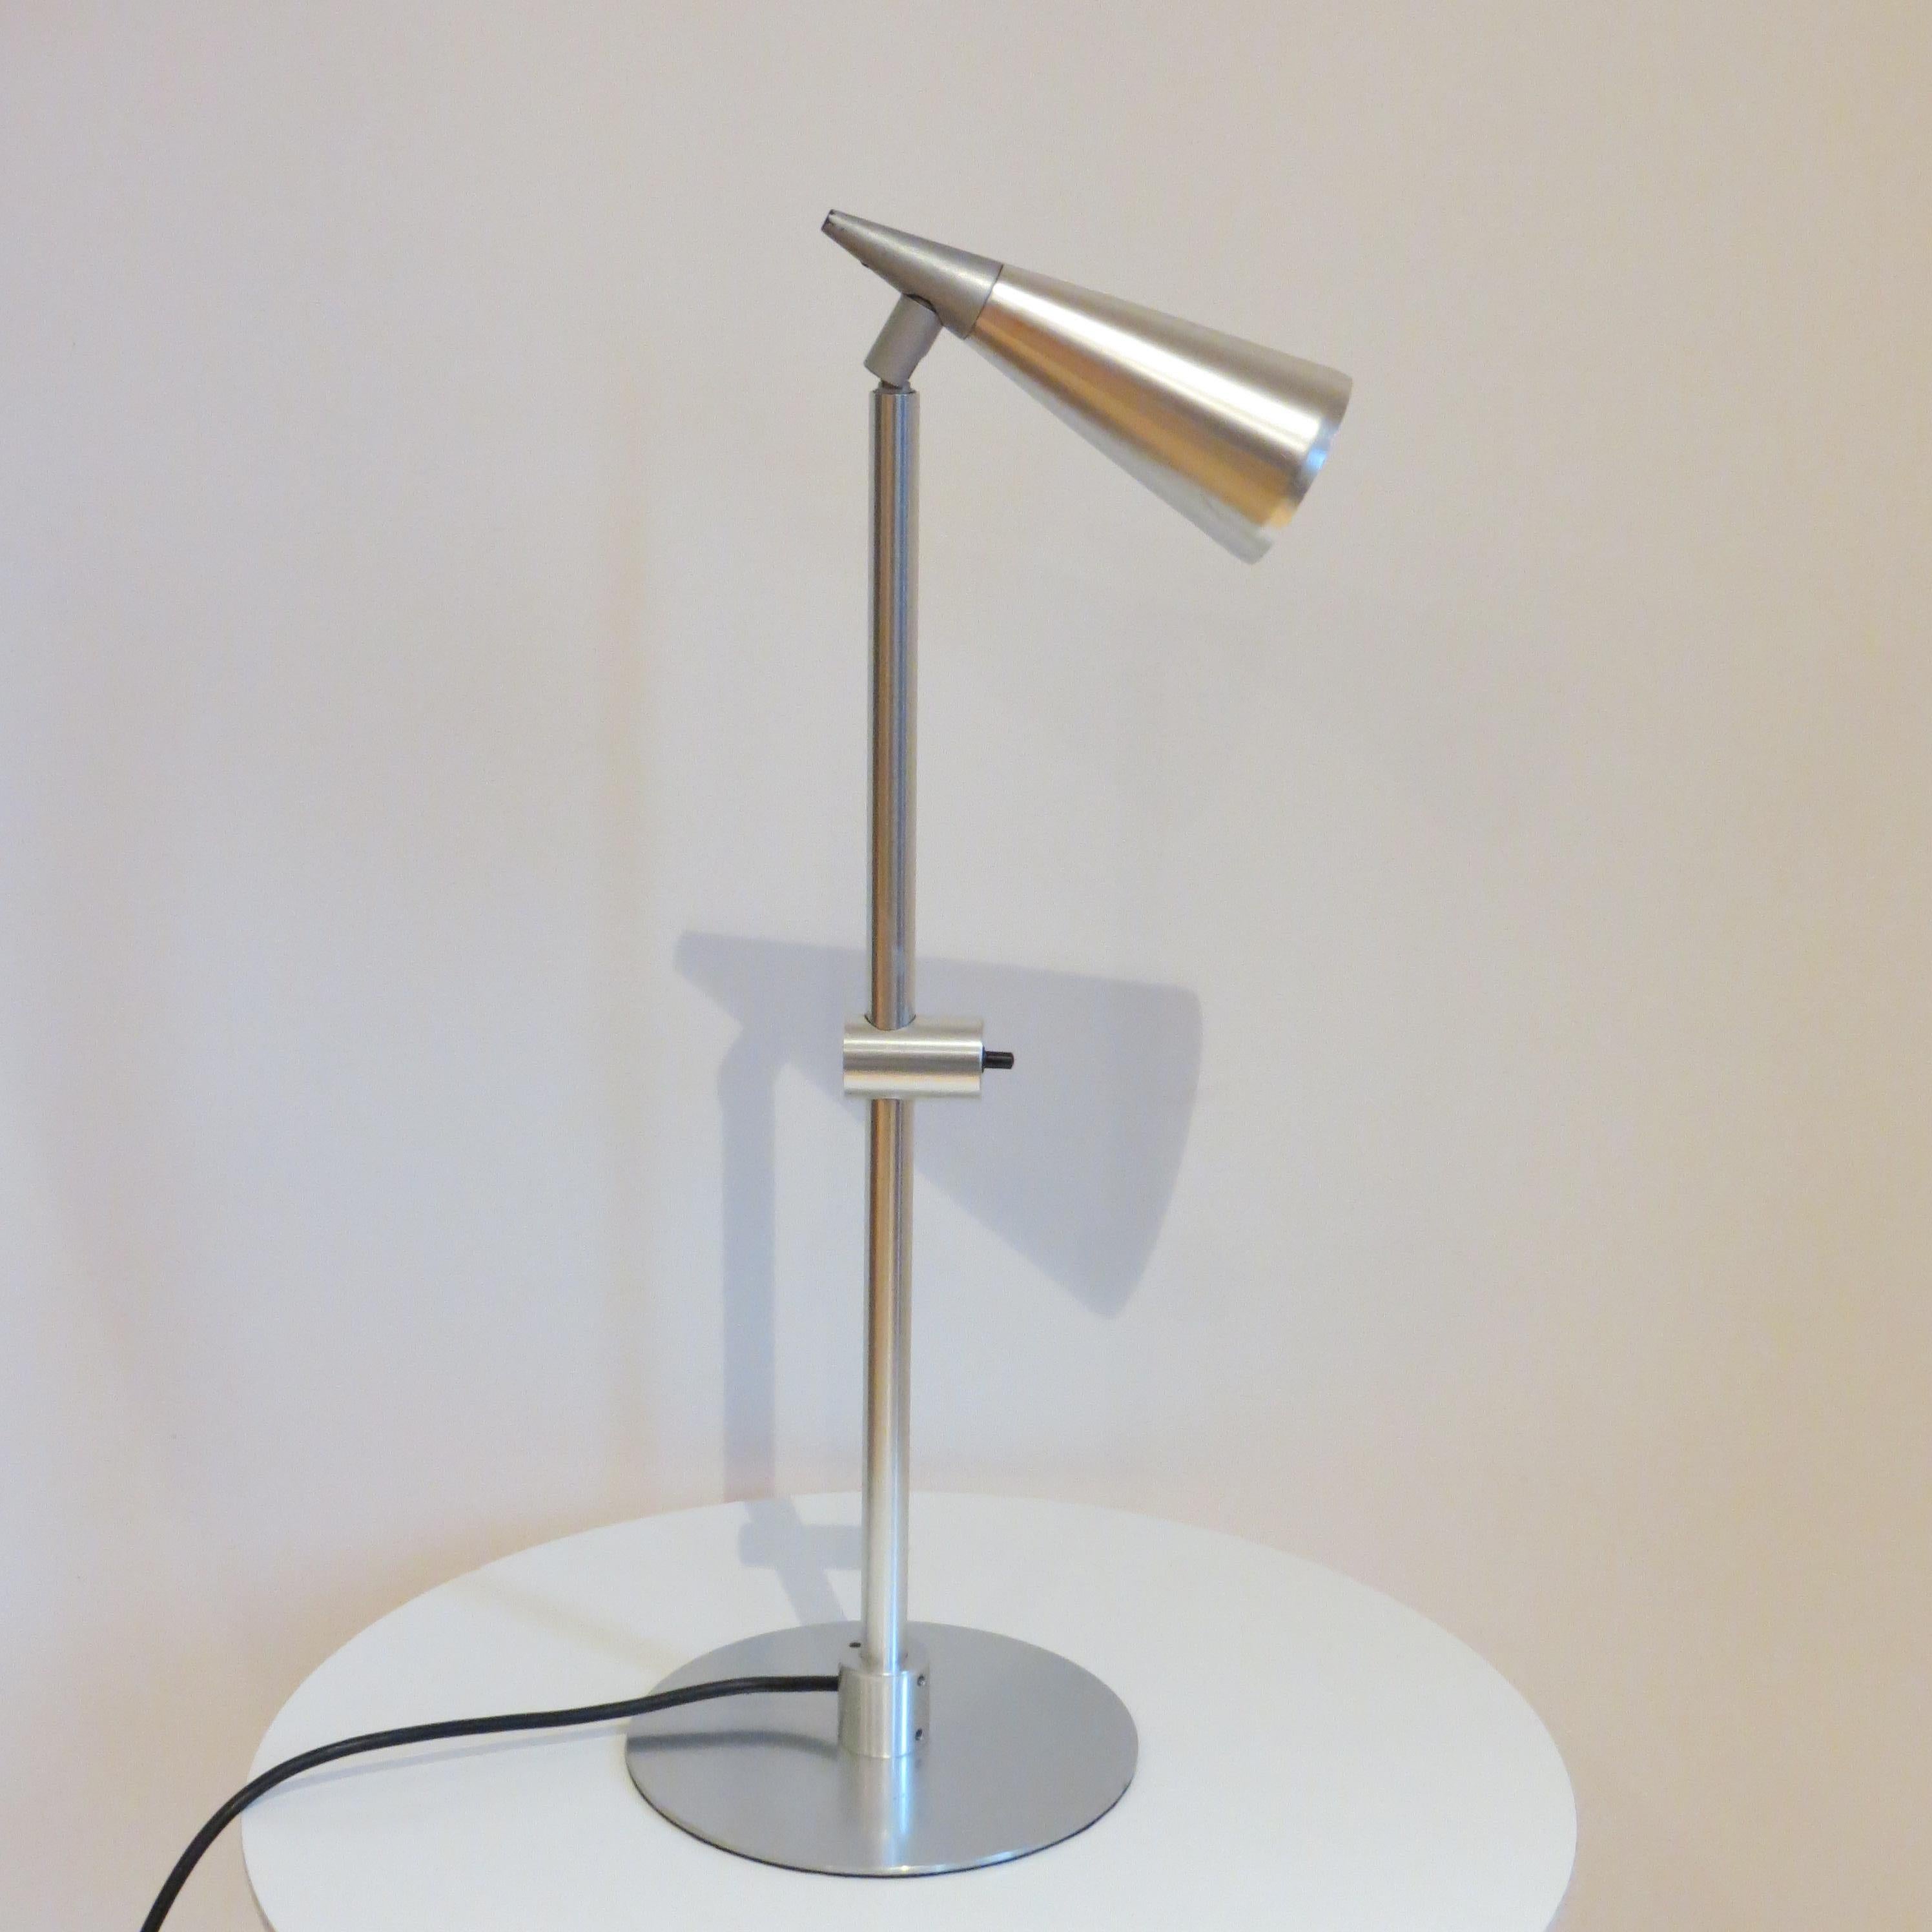 Very rare unique desk lamp  This is a prototype lamp - a one off - designed by Peter Nelson and manufactured by Architectural Lighting Ltd.  
A beautiful, very good quality, well engineered lamp made from aluminium with a billet aluminium switch